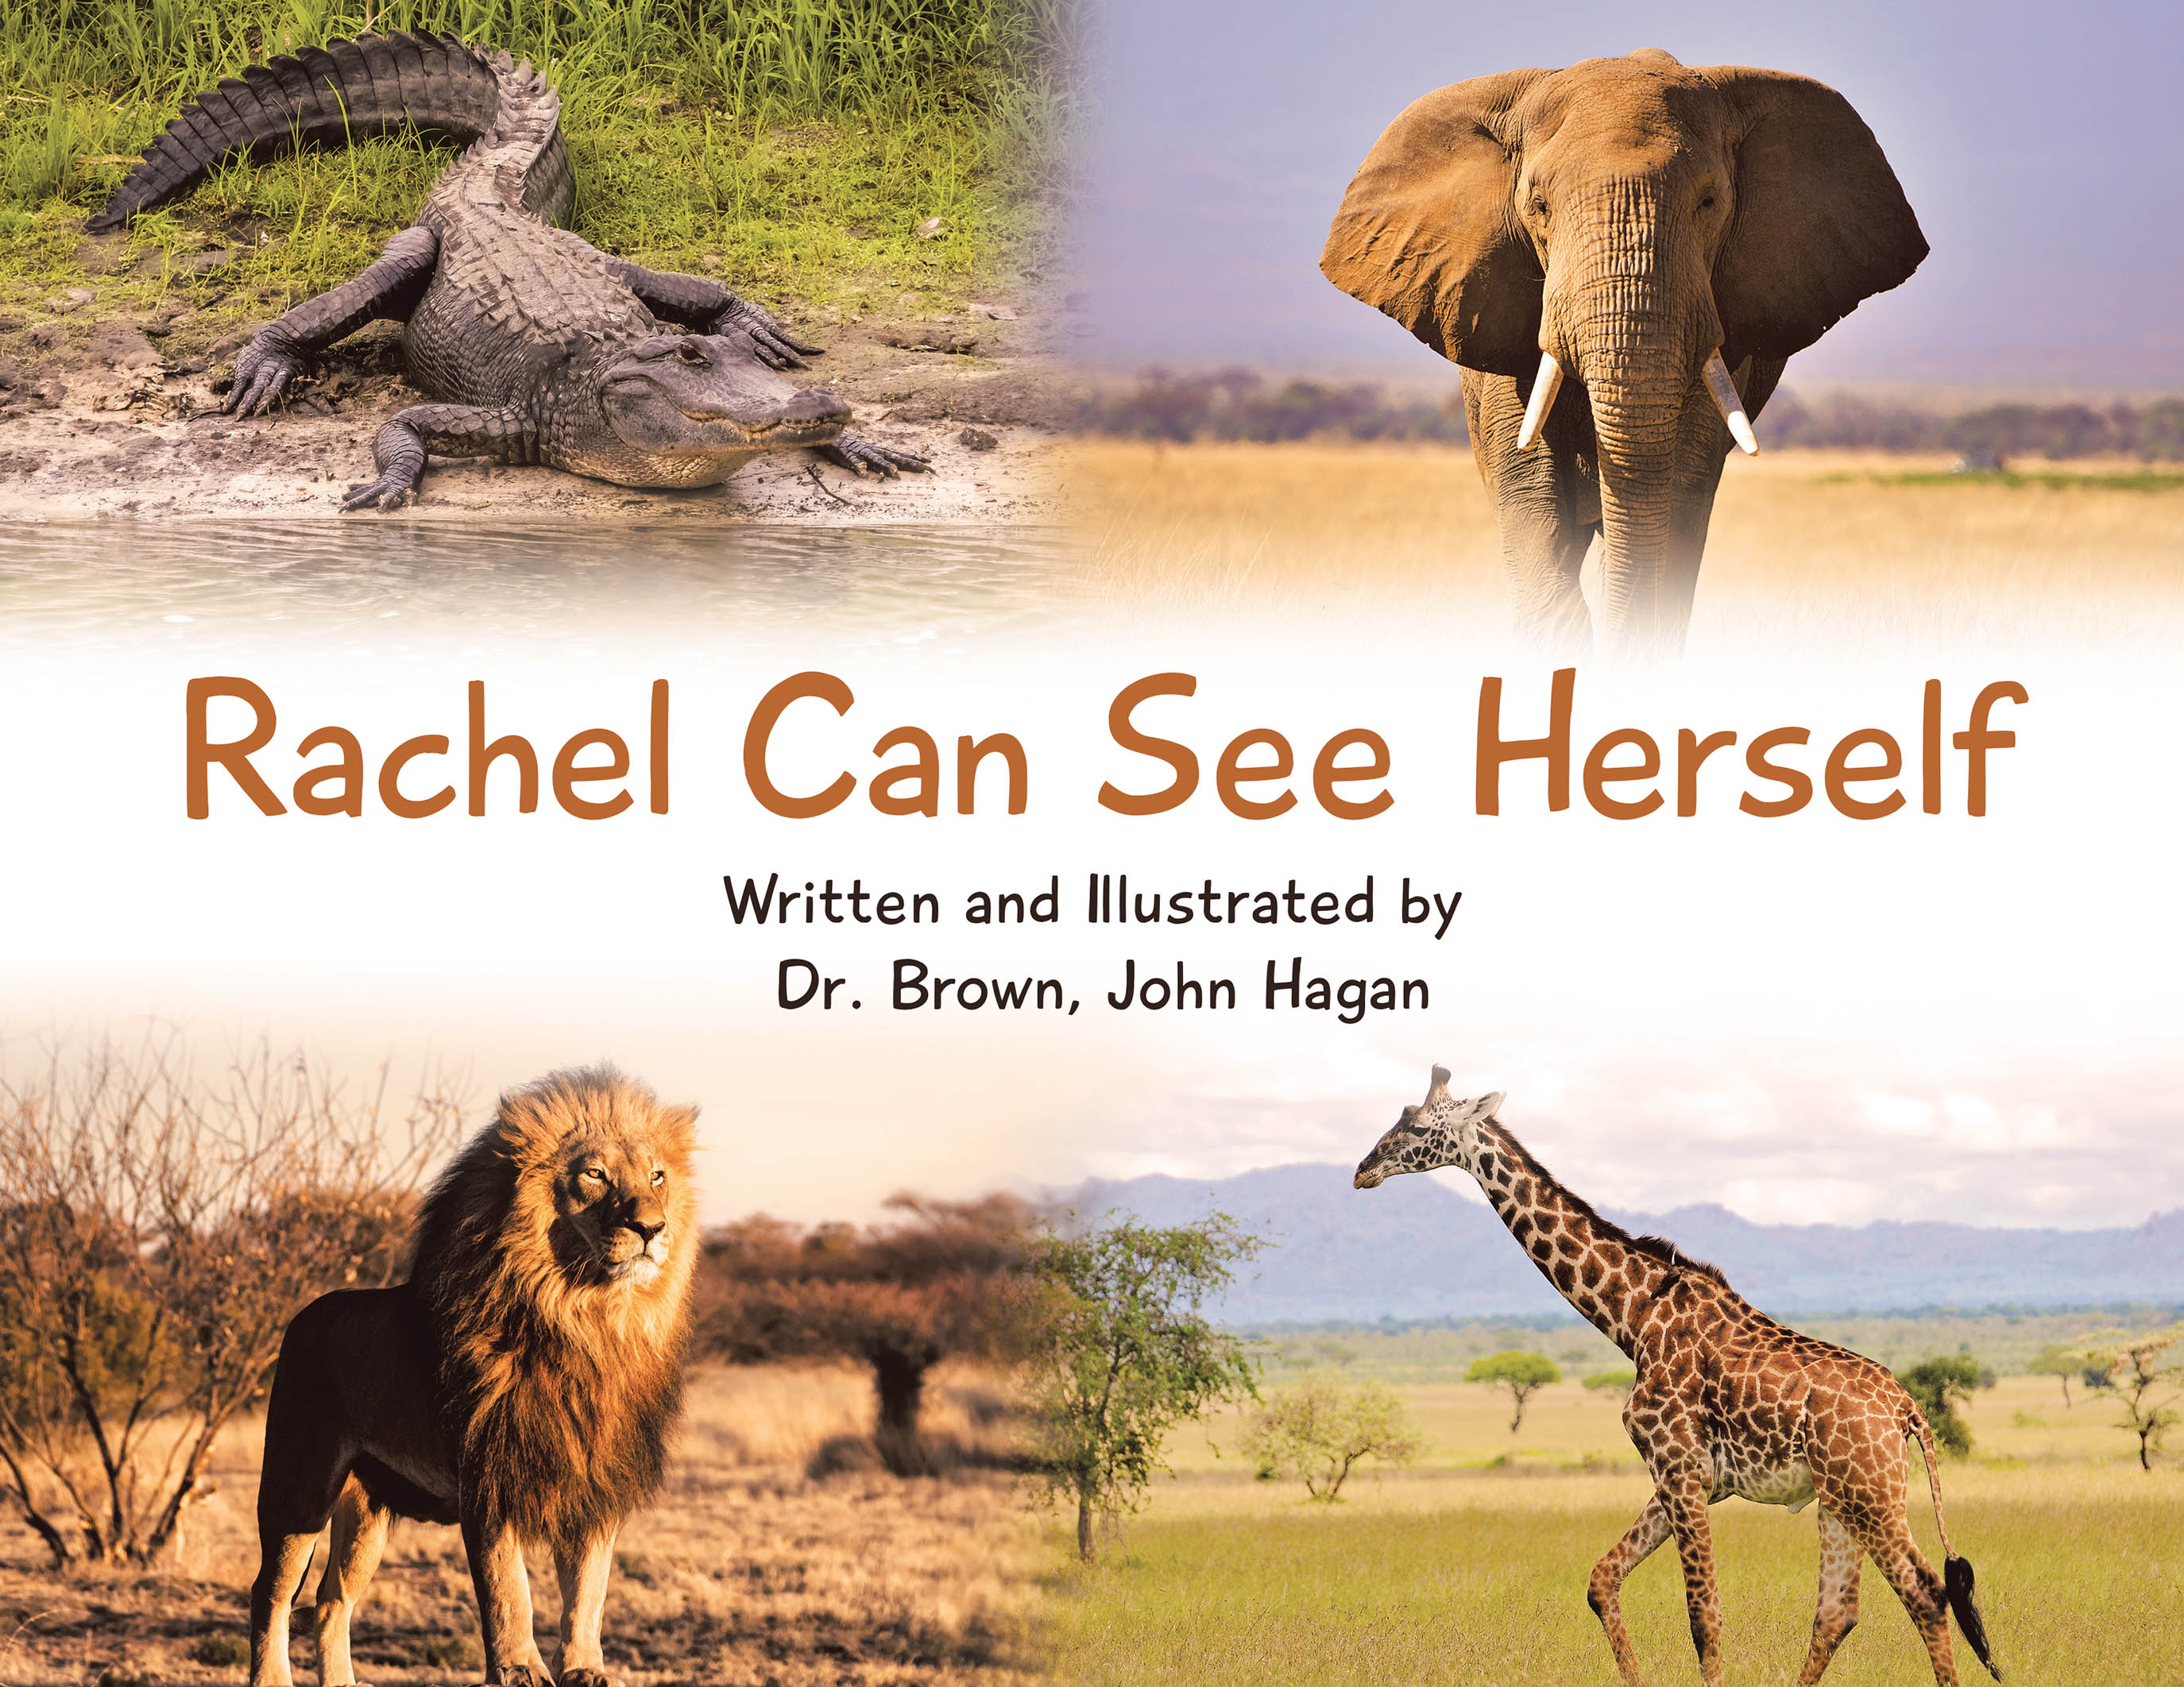 Author Dr. Brown, John Hagan’s New Book, "Rachel Can See Herself," is a Charming Tale That Follows a Young Girl’s Trip to the Zoo to Learn All About the Animals There